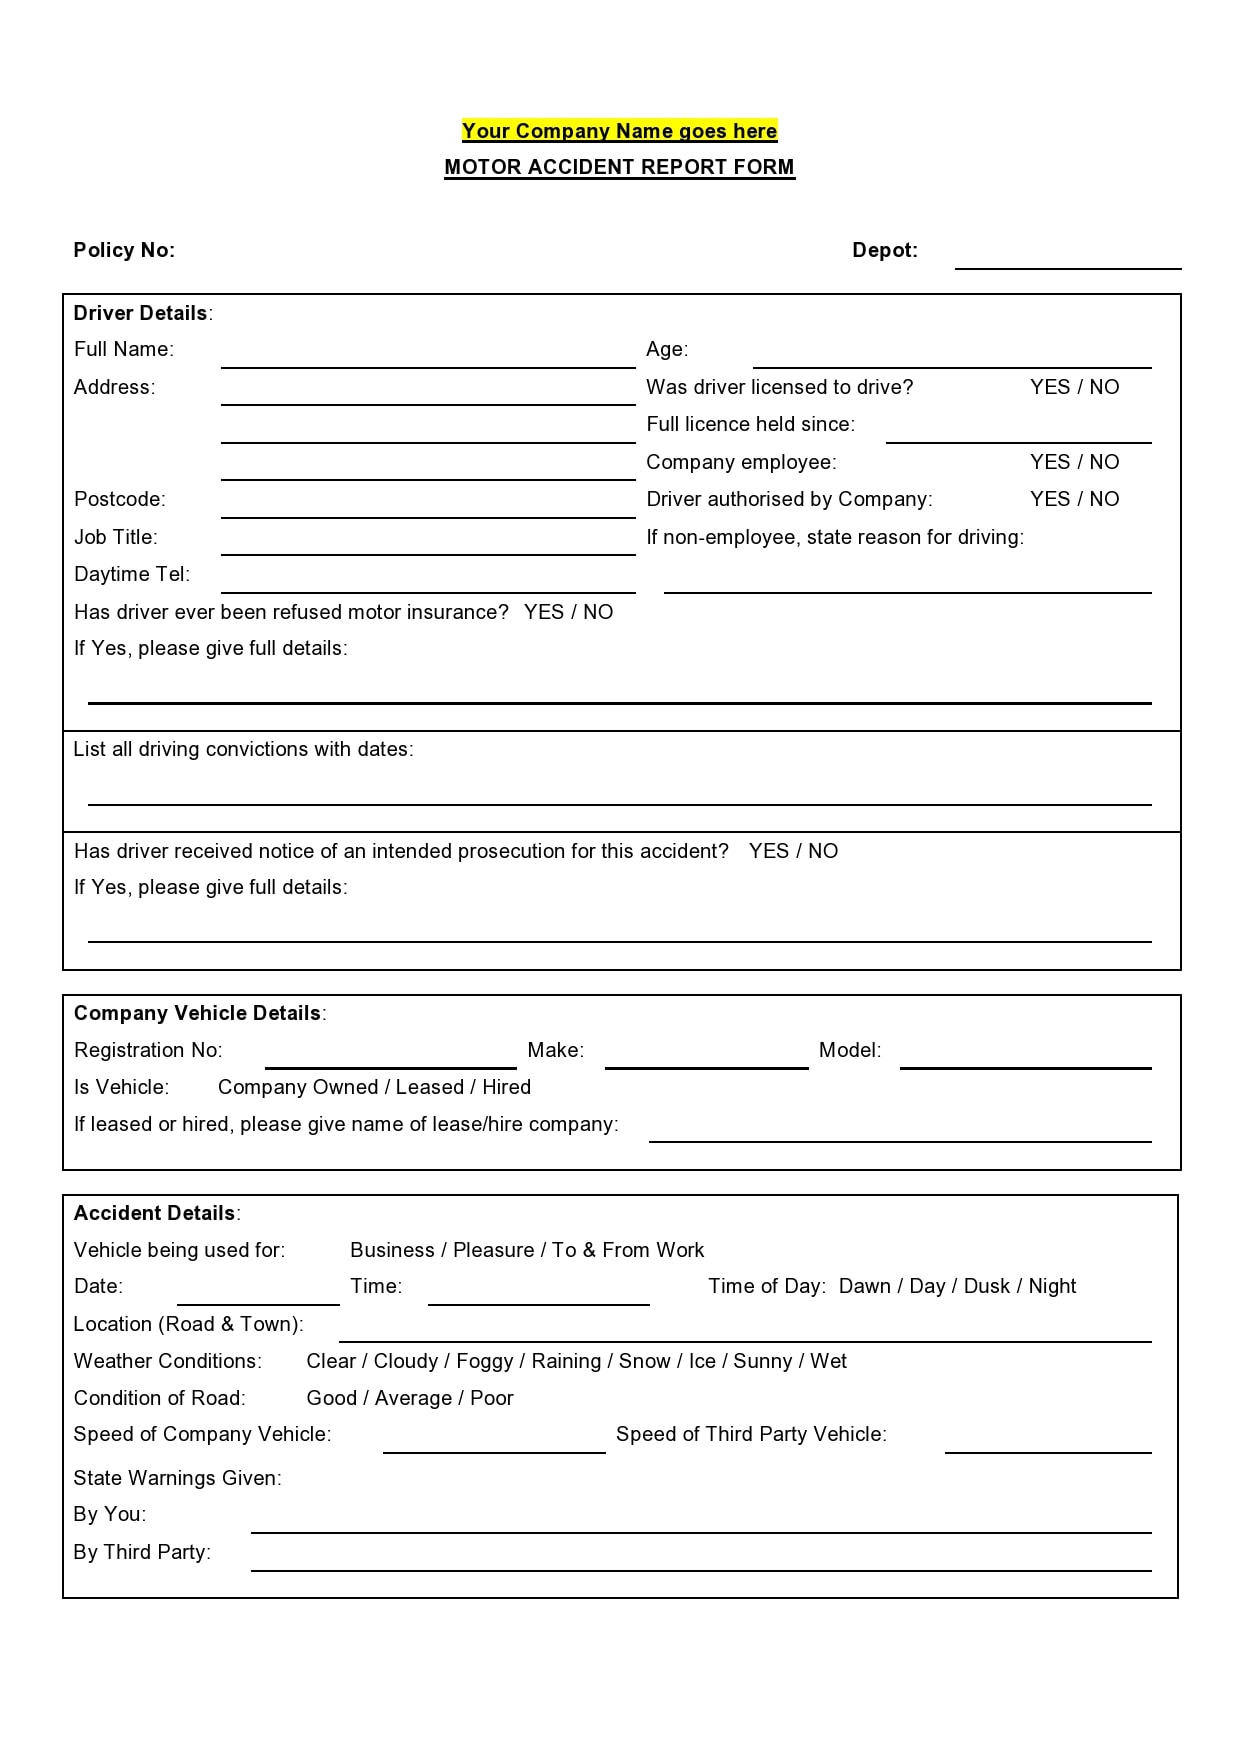 23 Accident Report Forms (Car, Work Injury, more) - TemplateArchive Intended For Motor Vehicle Accident Report Form Template